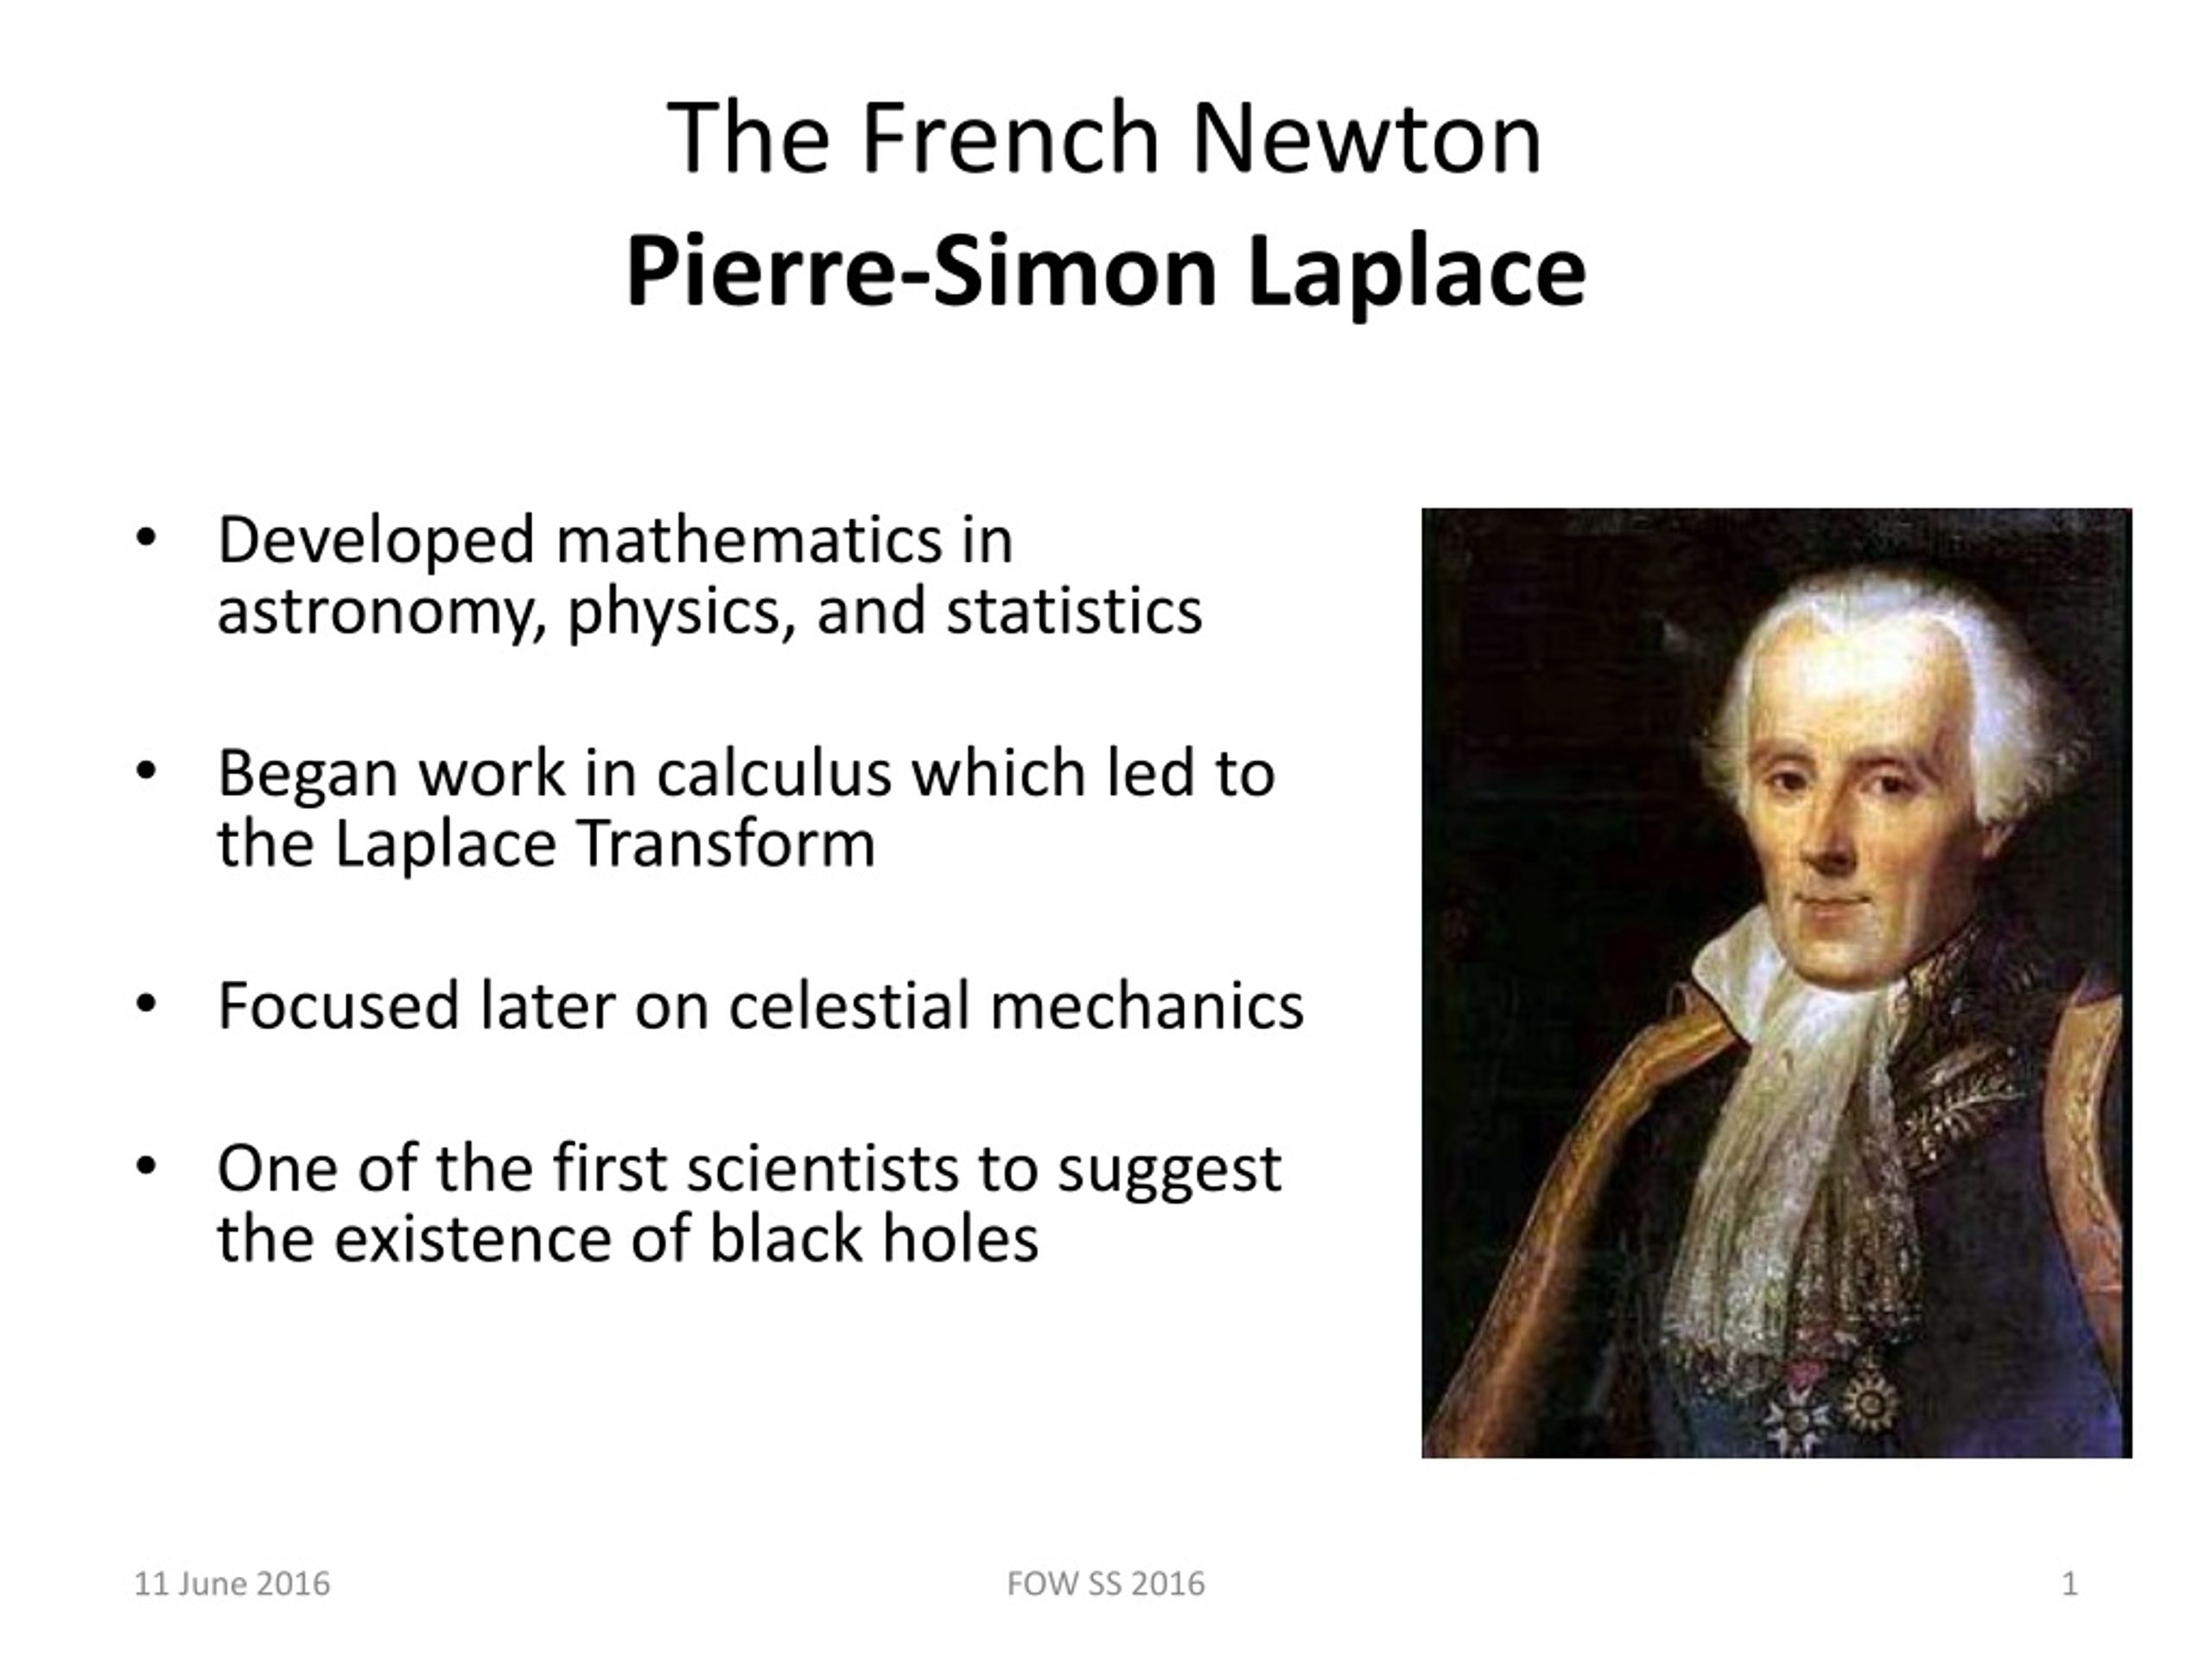 PPT - The French Newton Pierre-Simon Laplace PowerPoint Presentation, free download - ID:8871005